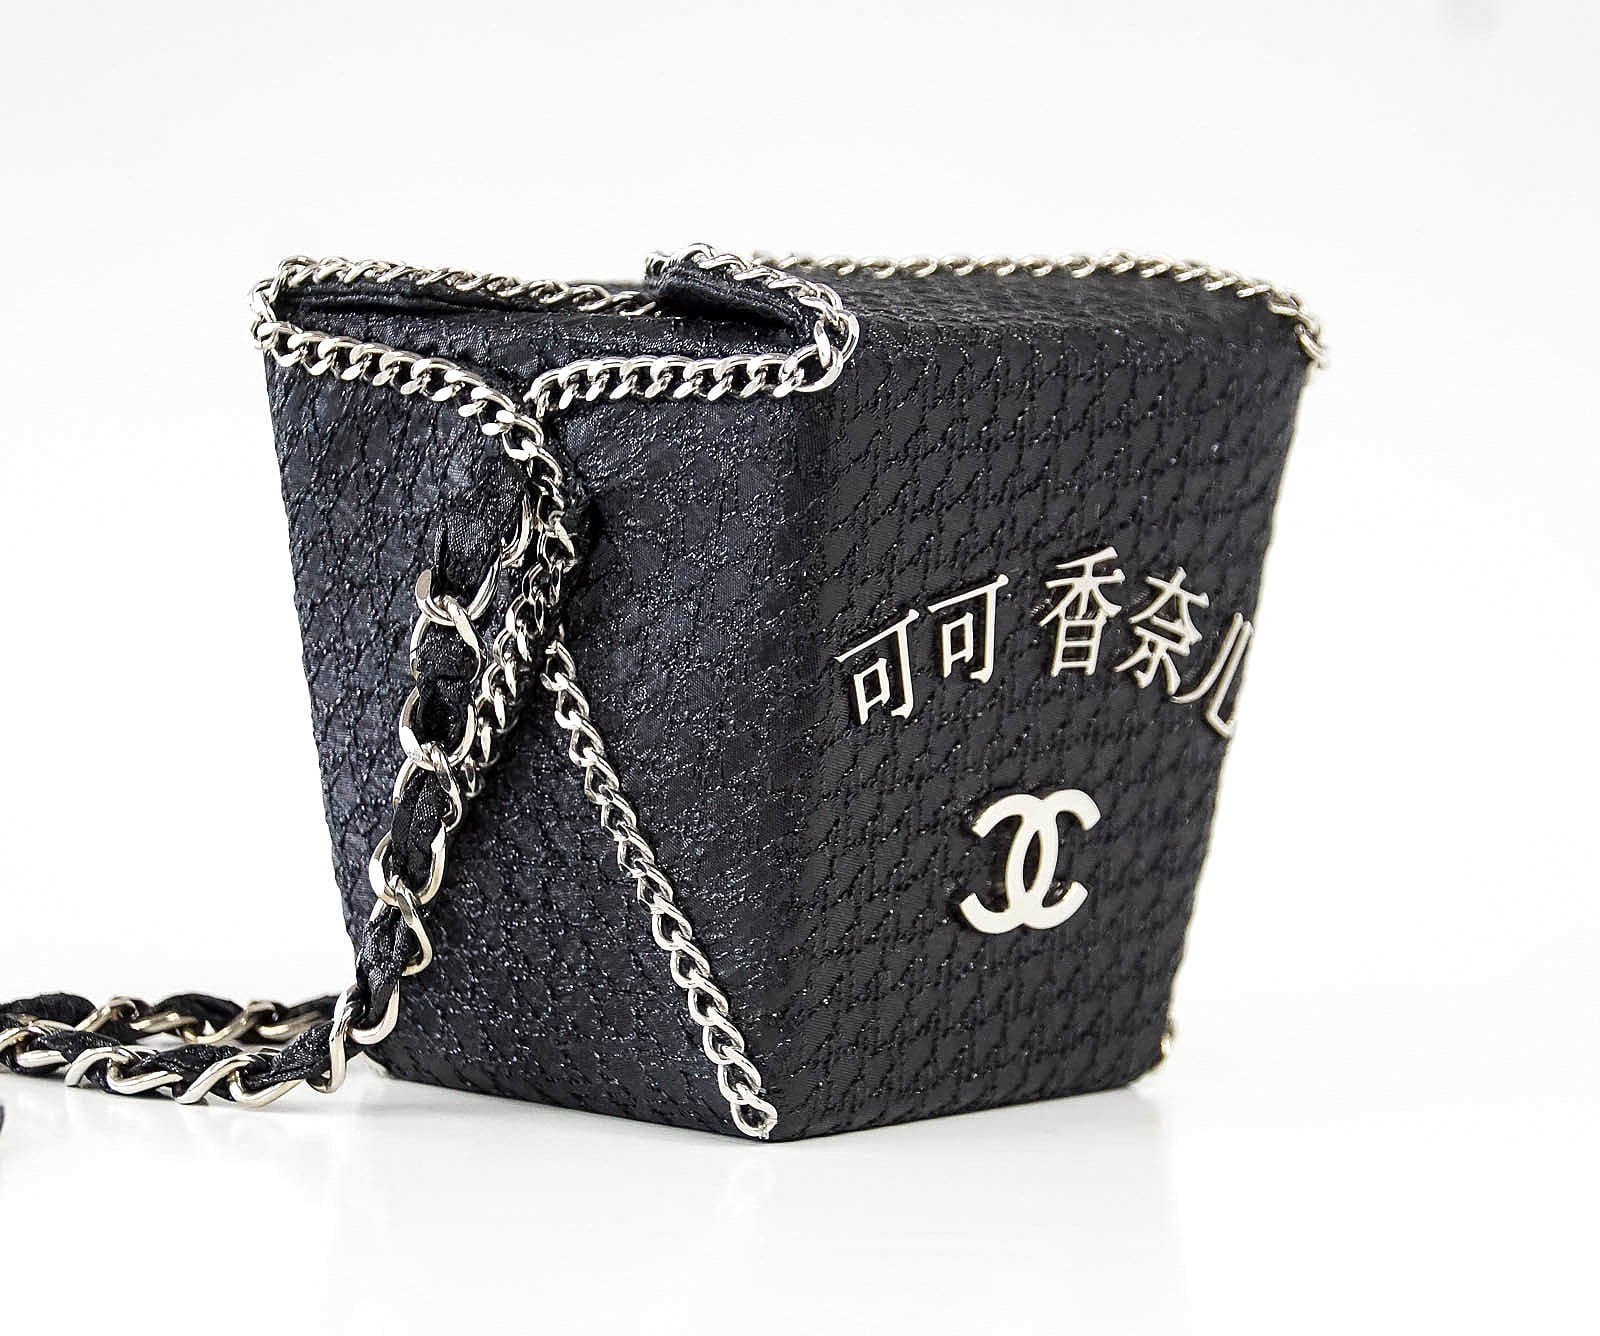 Chanel Take Away Box Bag Rare Limited Edition Runway Shanghai Collection - mightychic